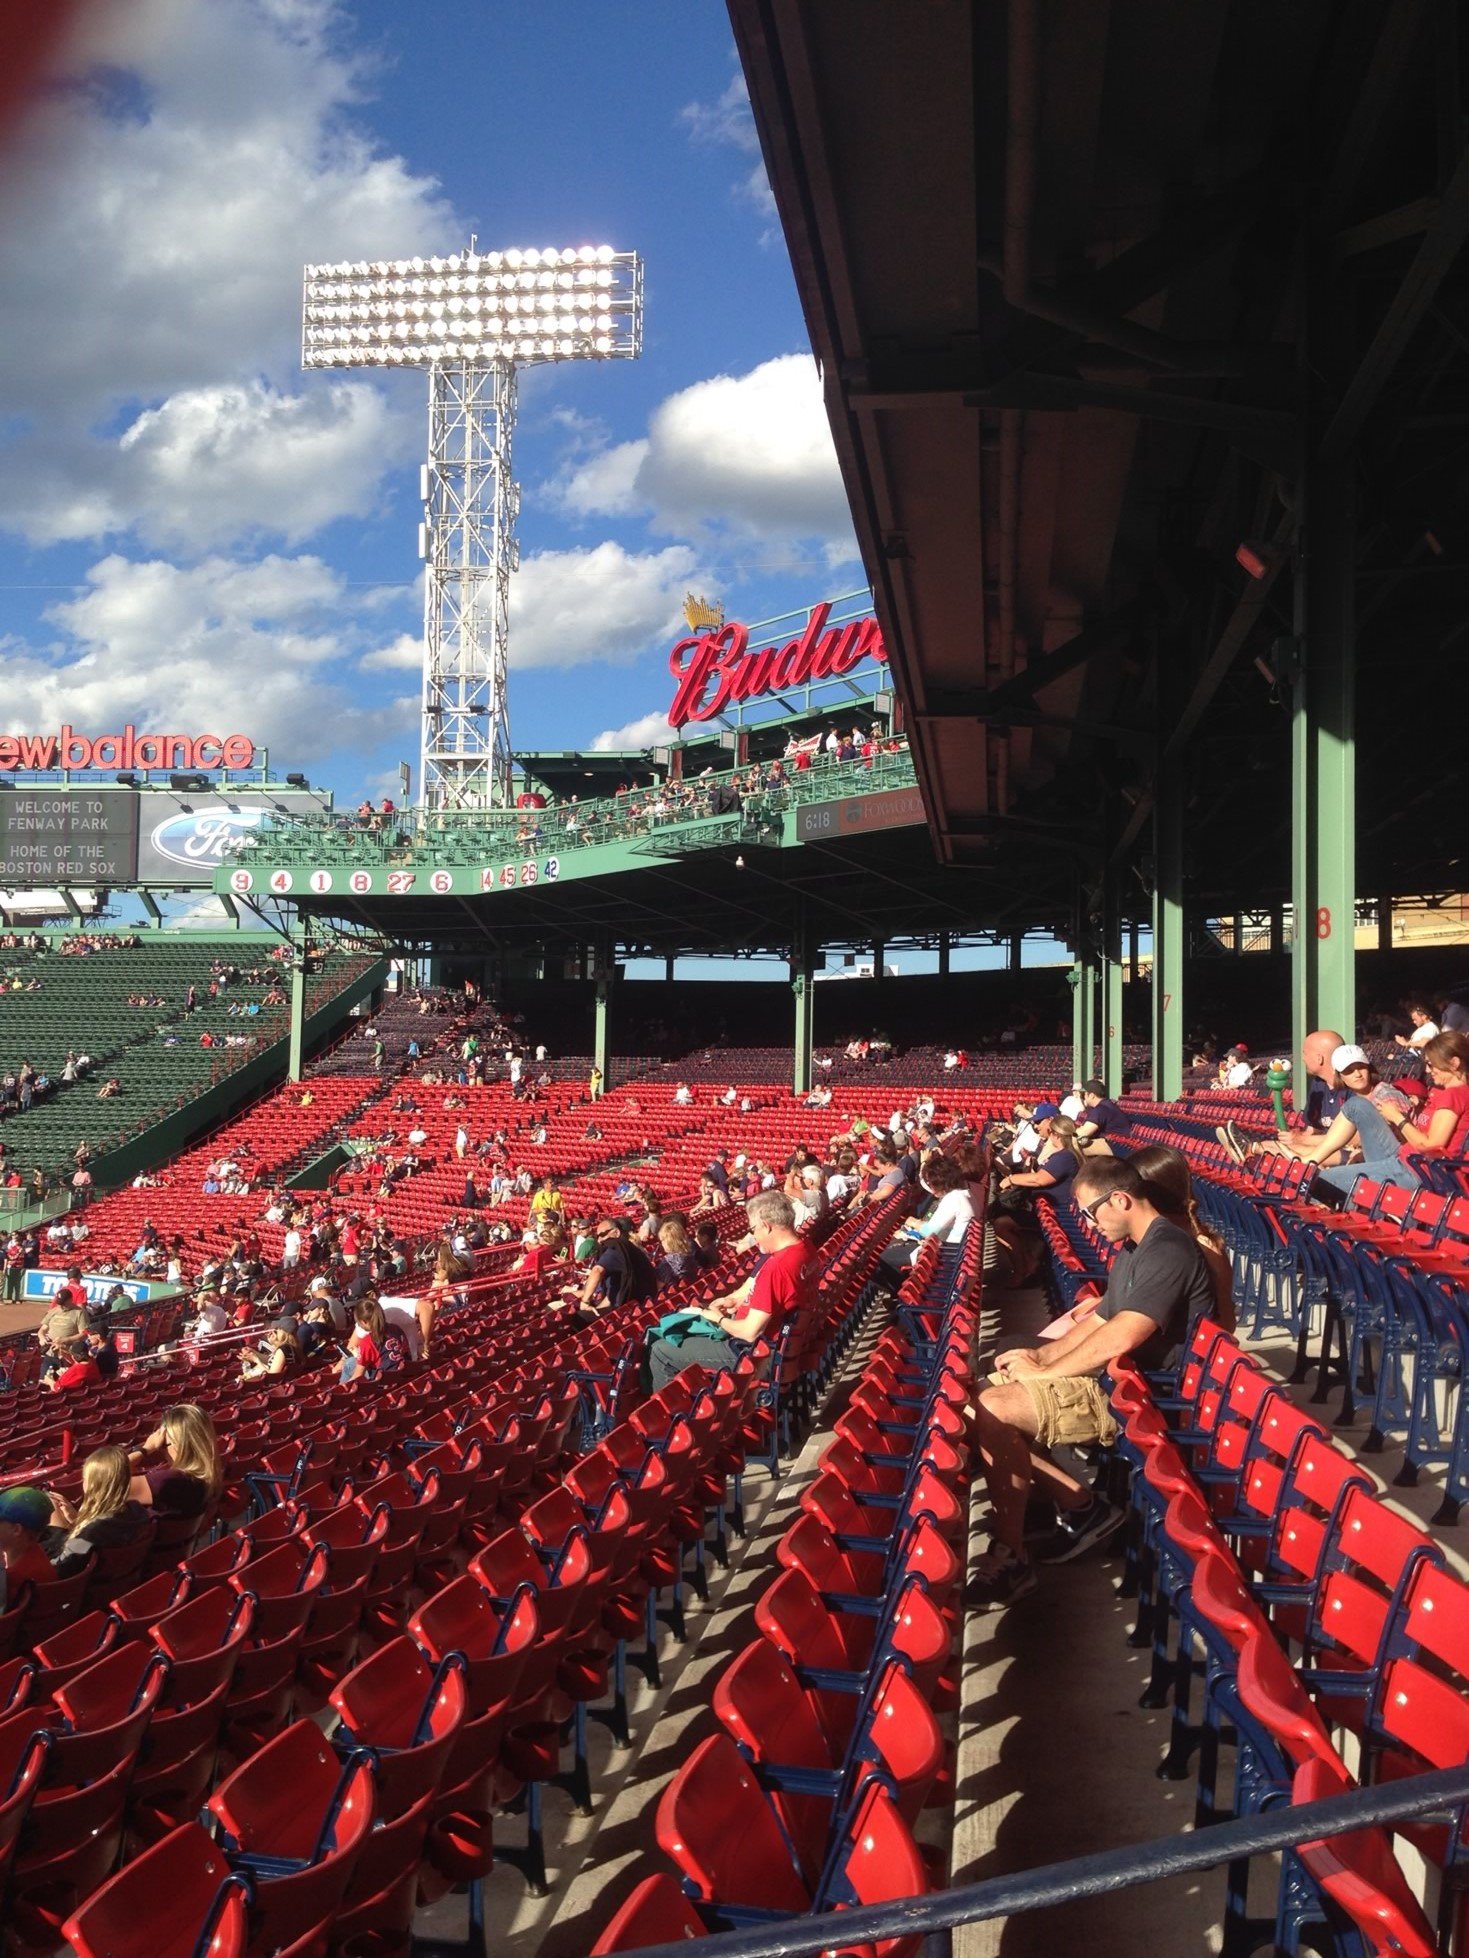 Fenway Park Seating Chart View From Seats